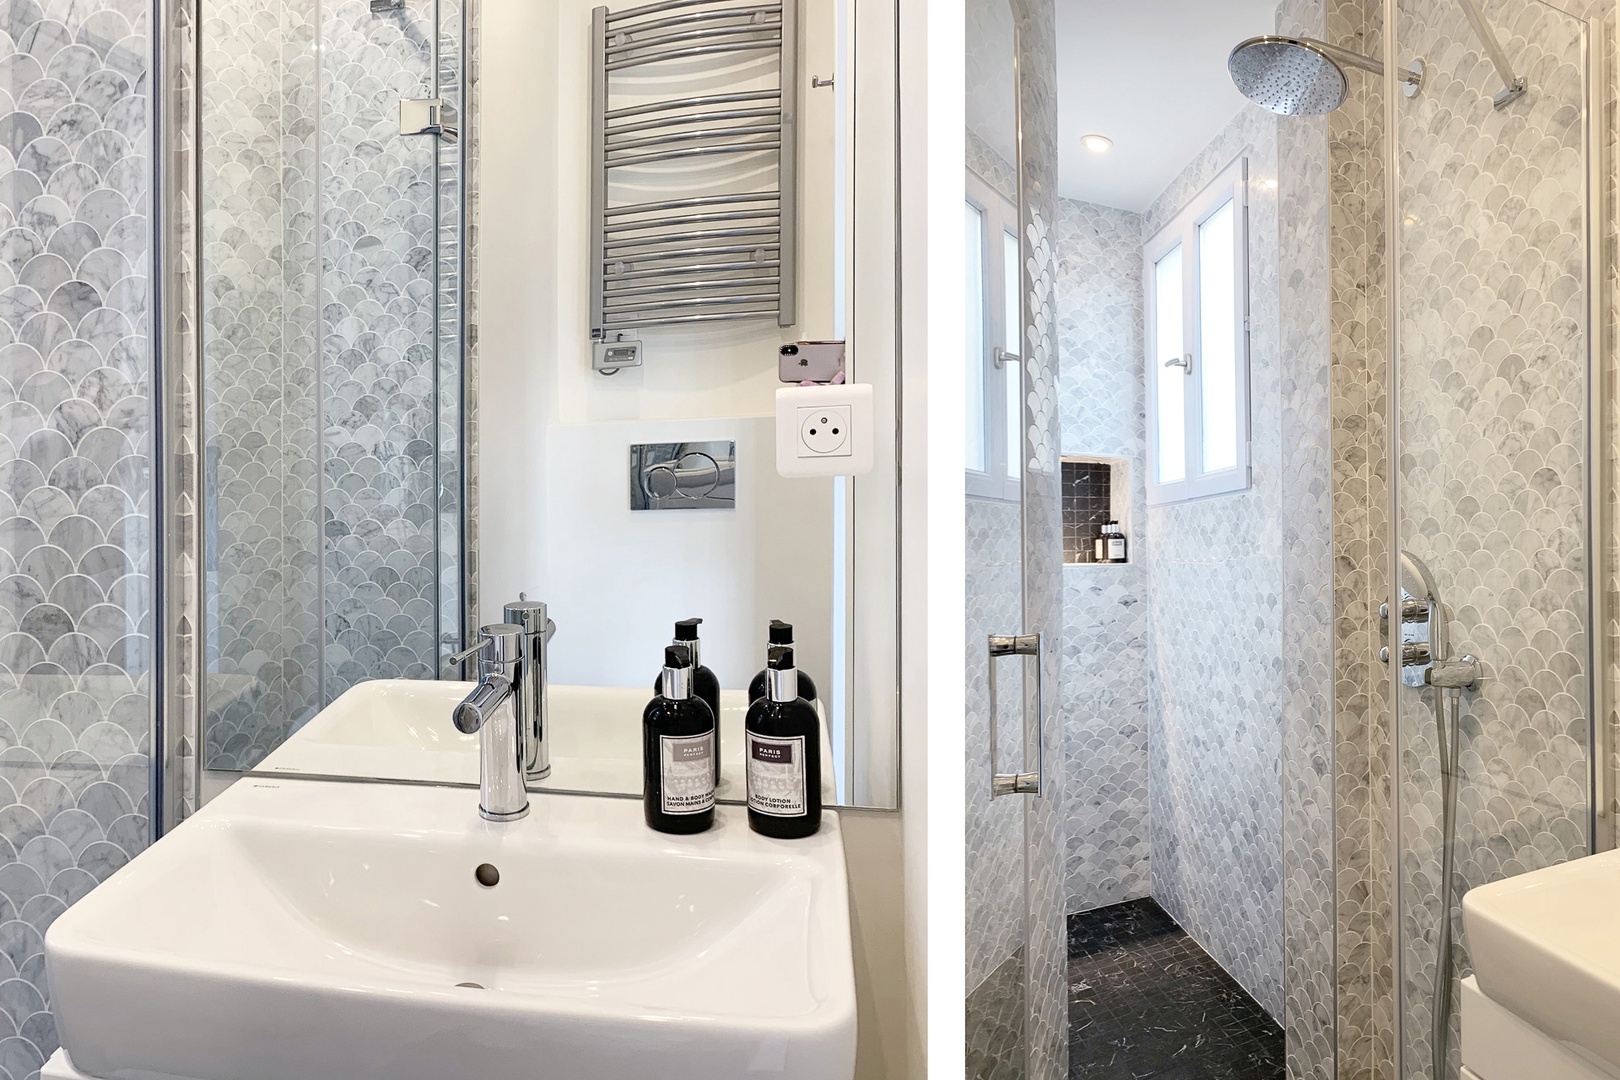 The luxurious en suite bathroom has a shower, toilet and sink.